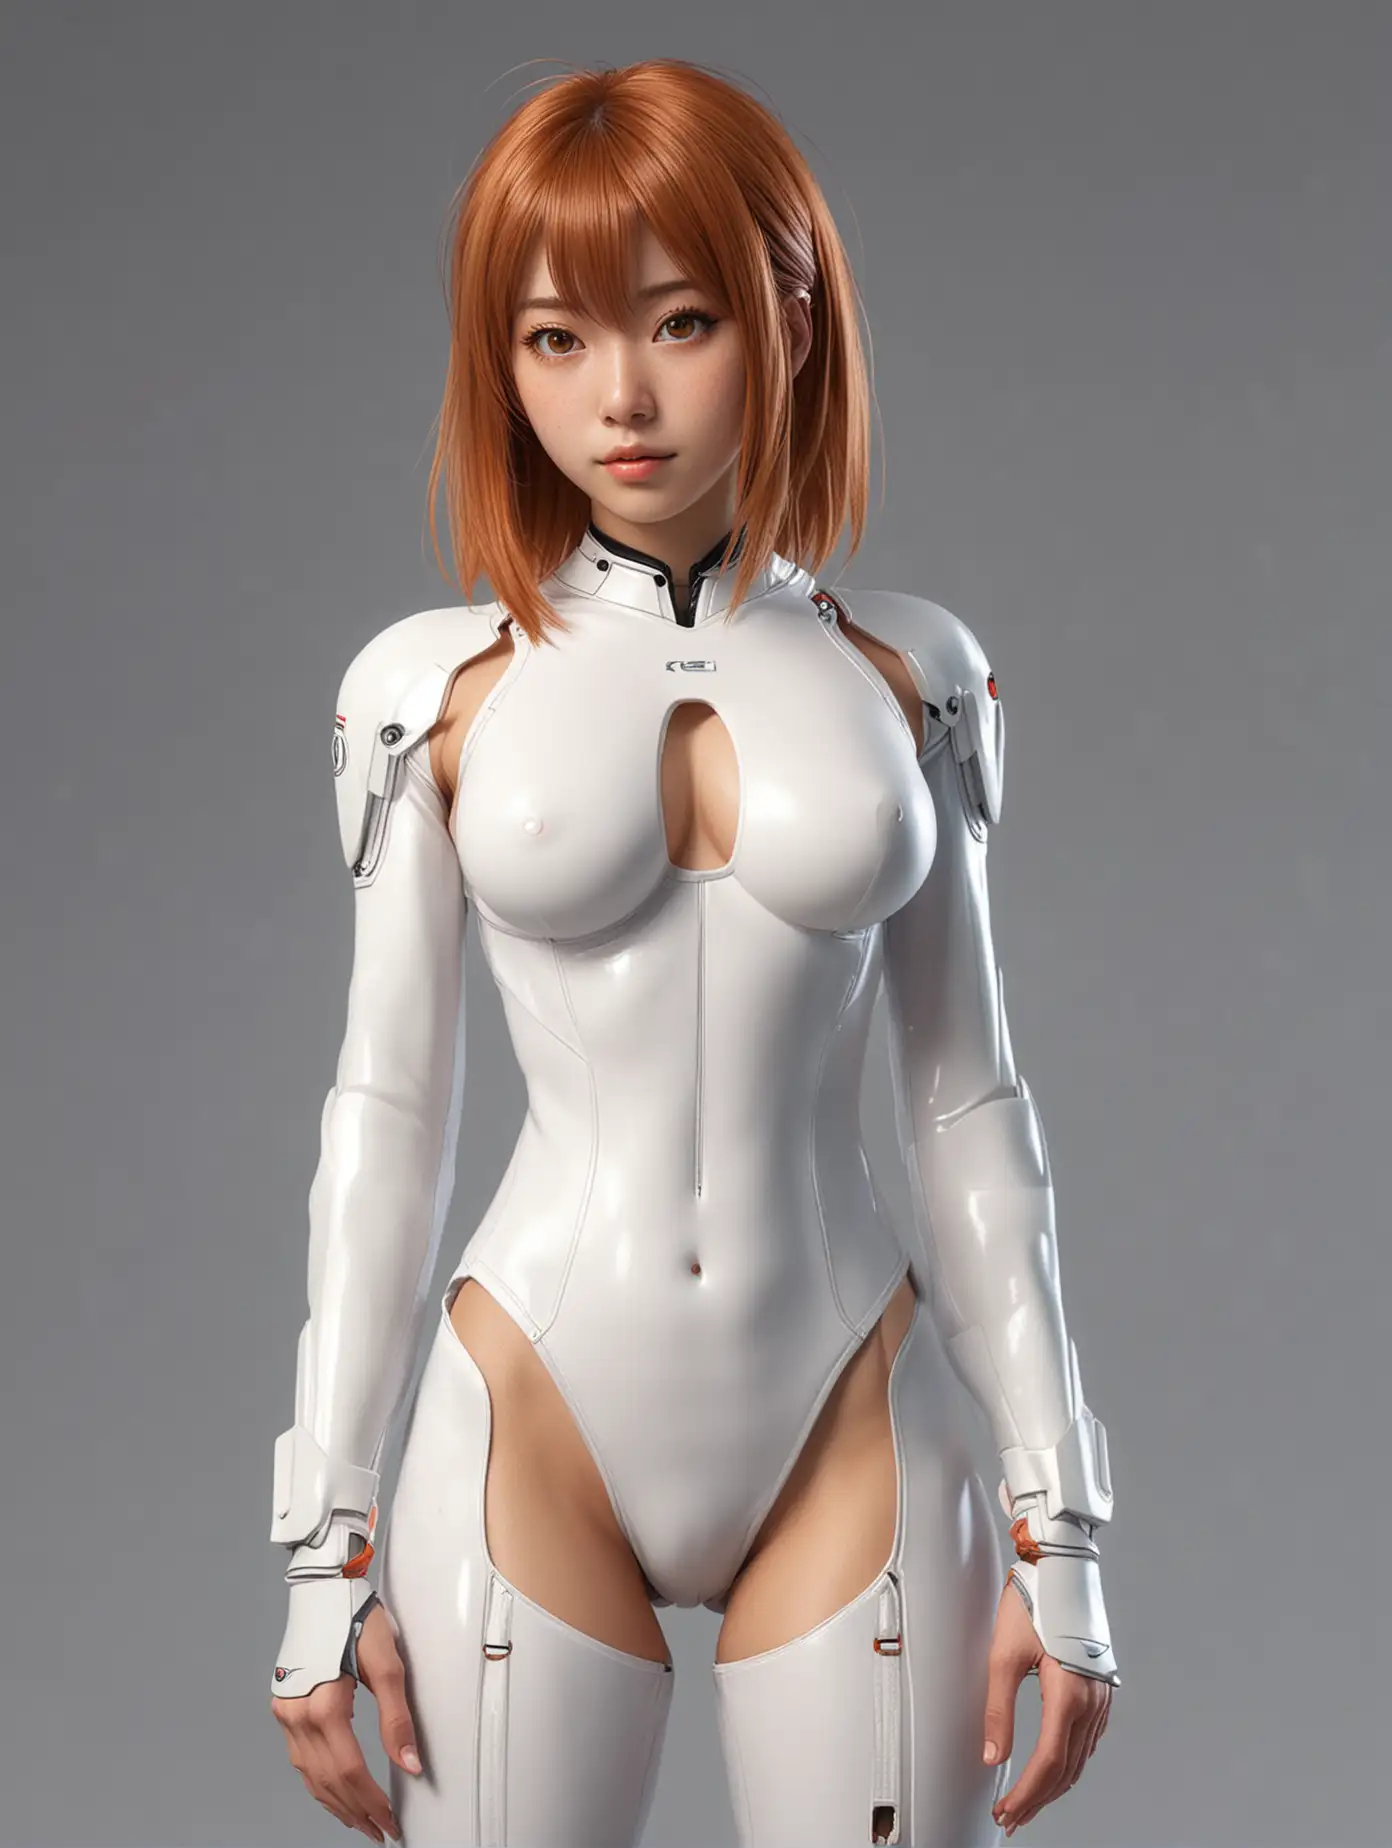 Fullbody japanese girl with caramel-colored medium length hair, huge amber eyes, freckles, wearing Rei Ayanami suit. Hyperrealistic fullbody. showing her ass on a studio